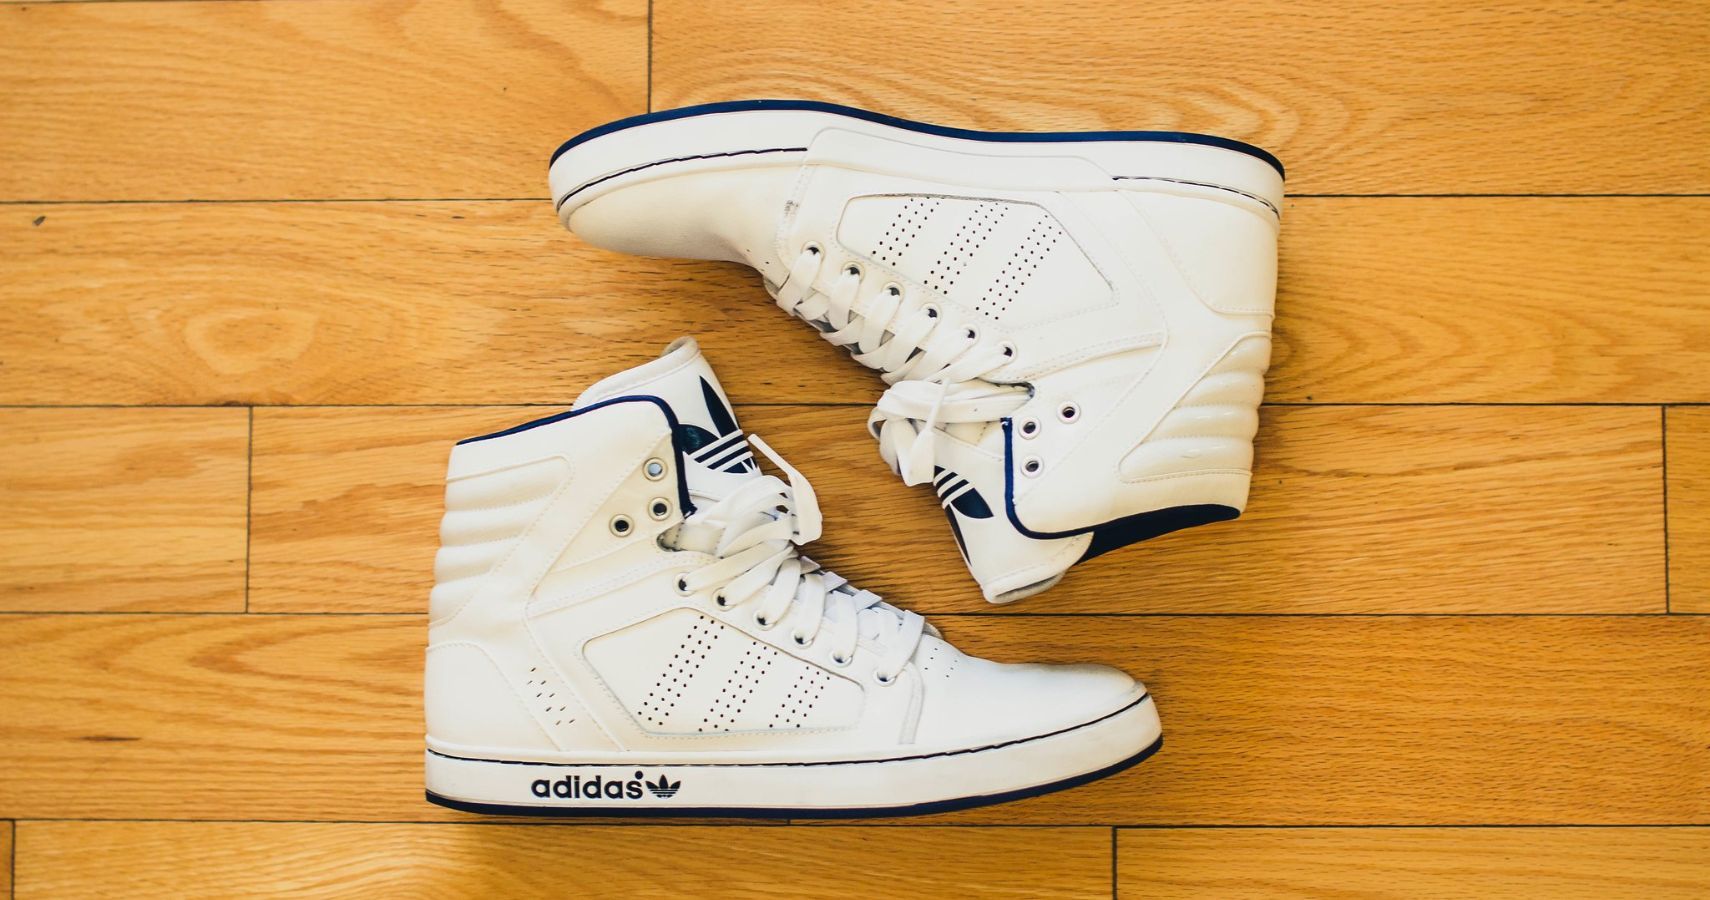 The 8 Most Expensive Adidas Sneakers All Time | TheRichest